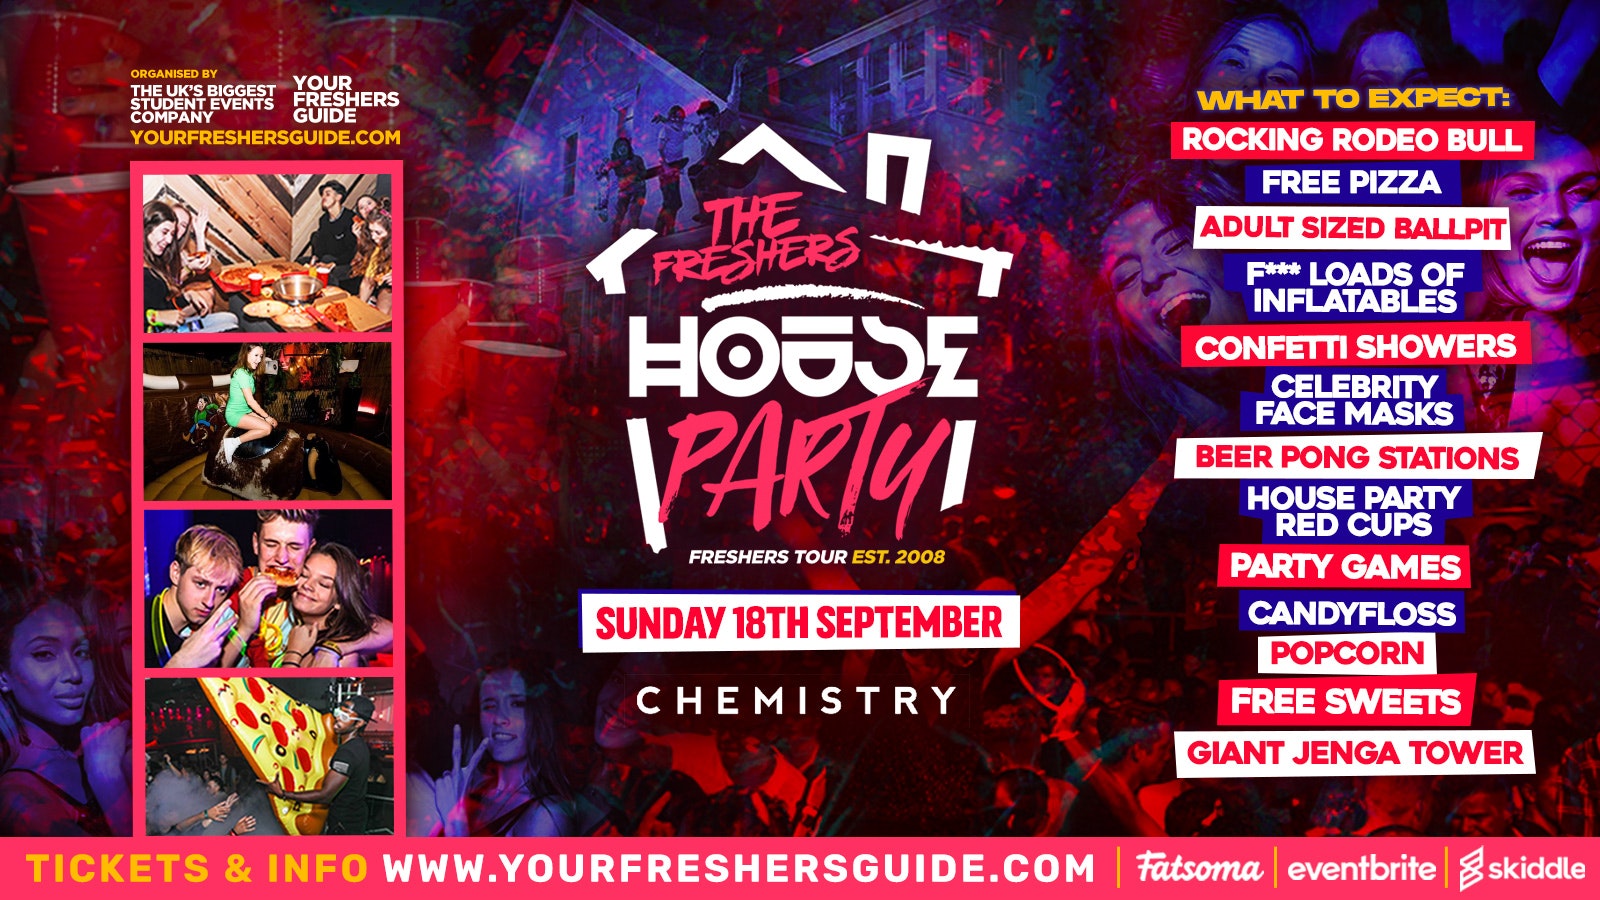 The Freshers House Party / Canterbury Freshers 2022 – LAST 25 TICKETS!